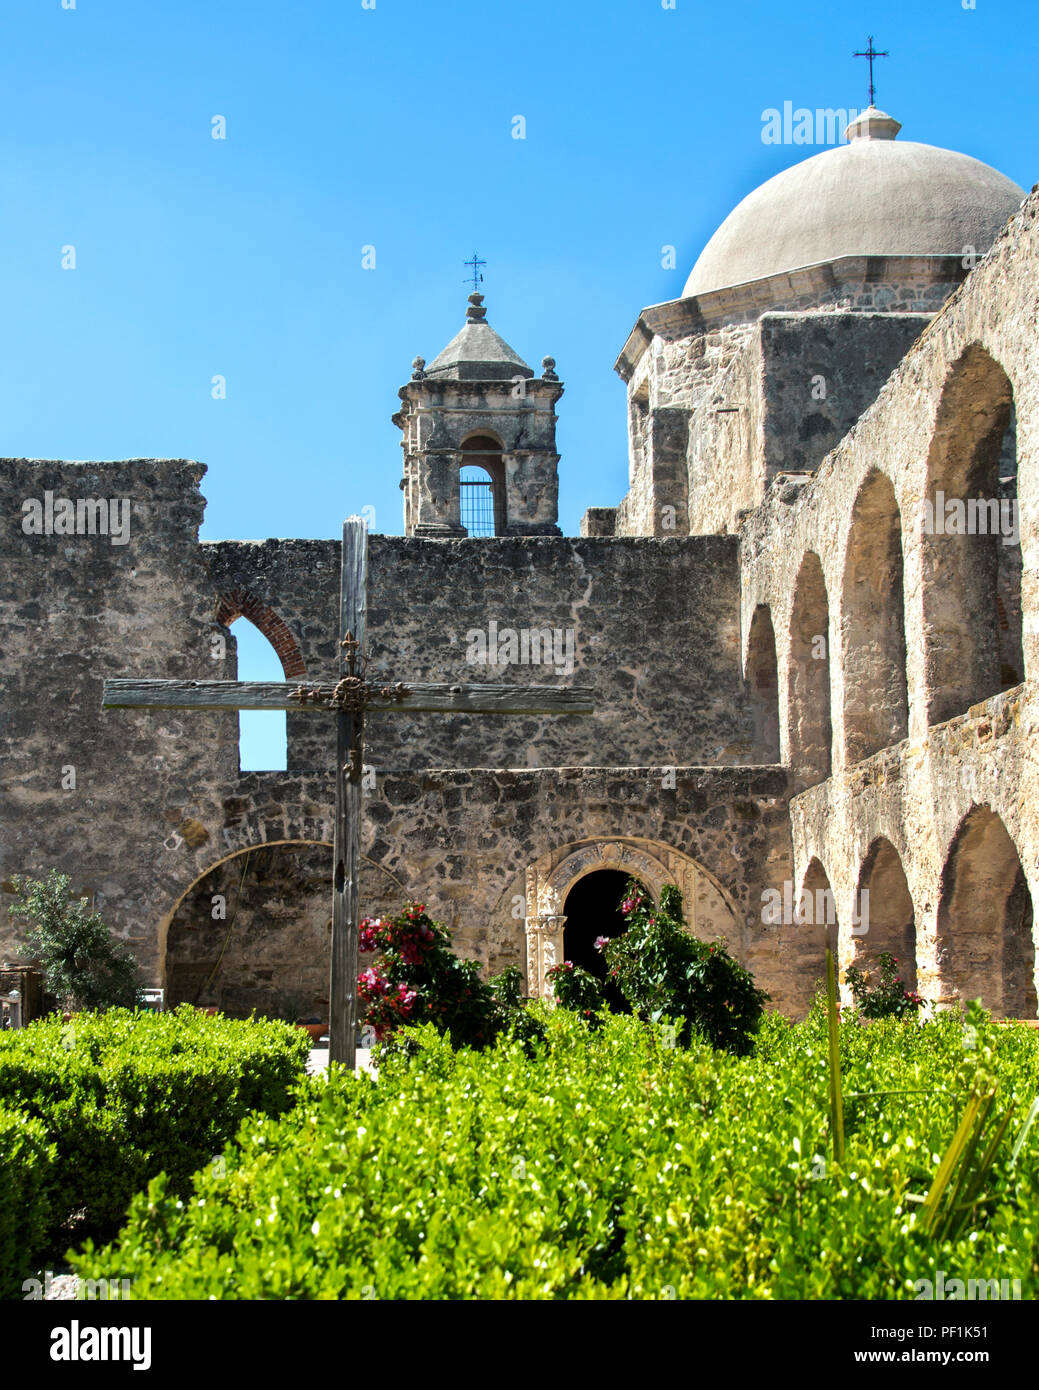 Mission San Jose San Antonio Texas View of the mission complex with bell tower, arched walls, cross, and chapel dome from the Convento. Stock Photo